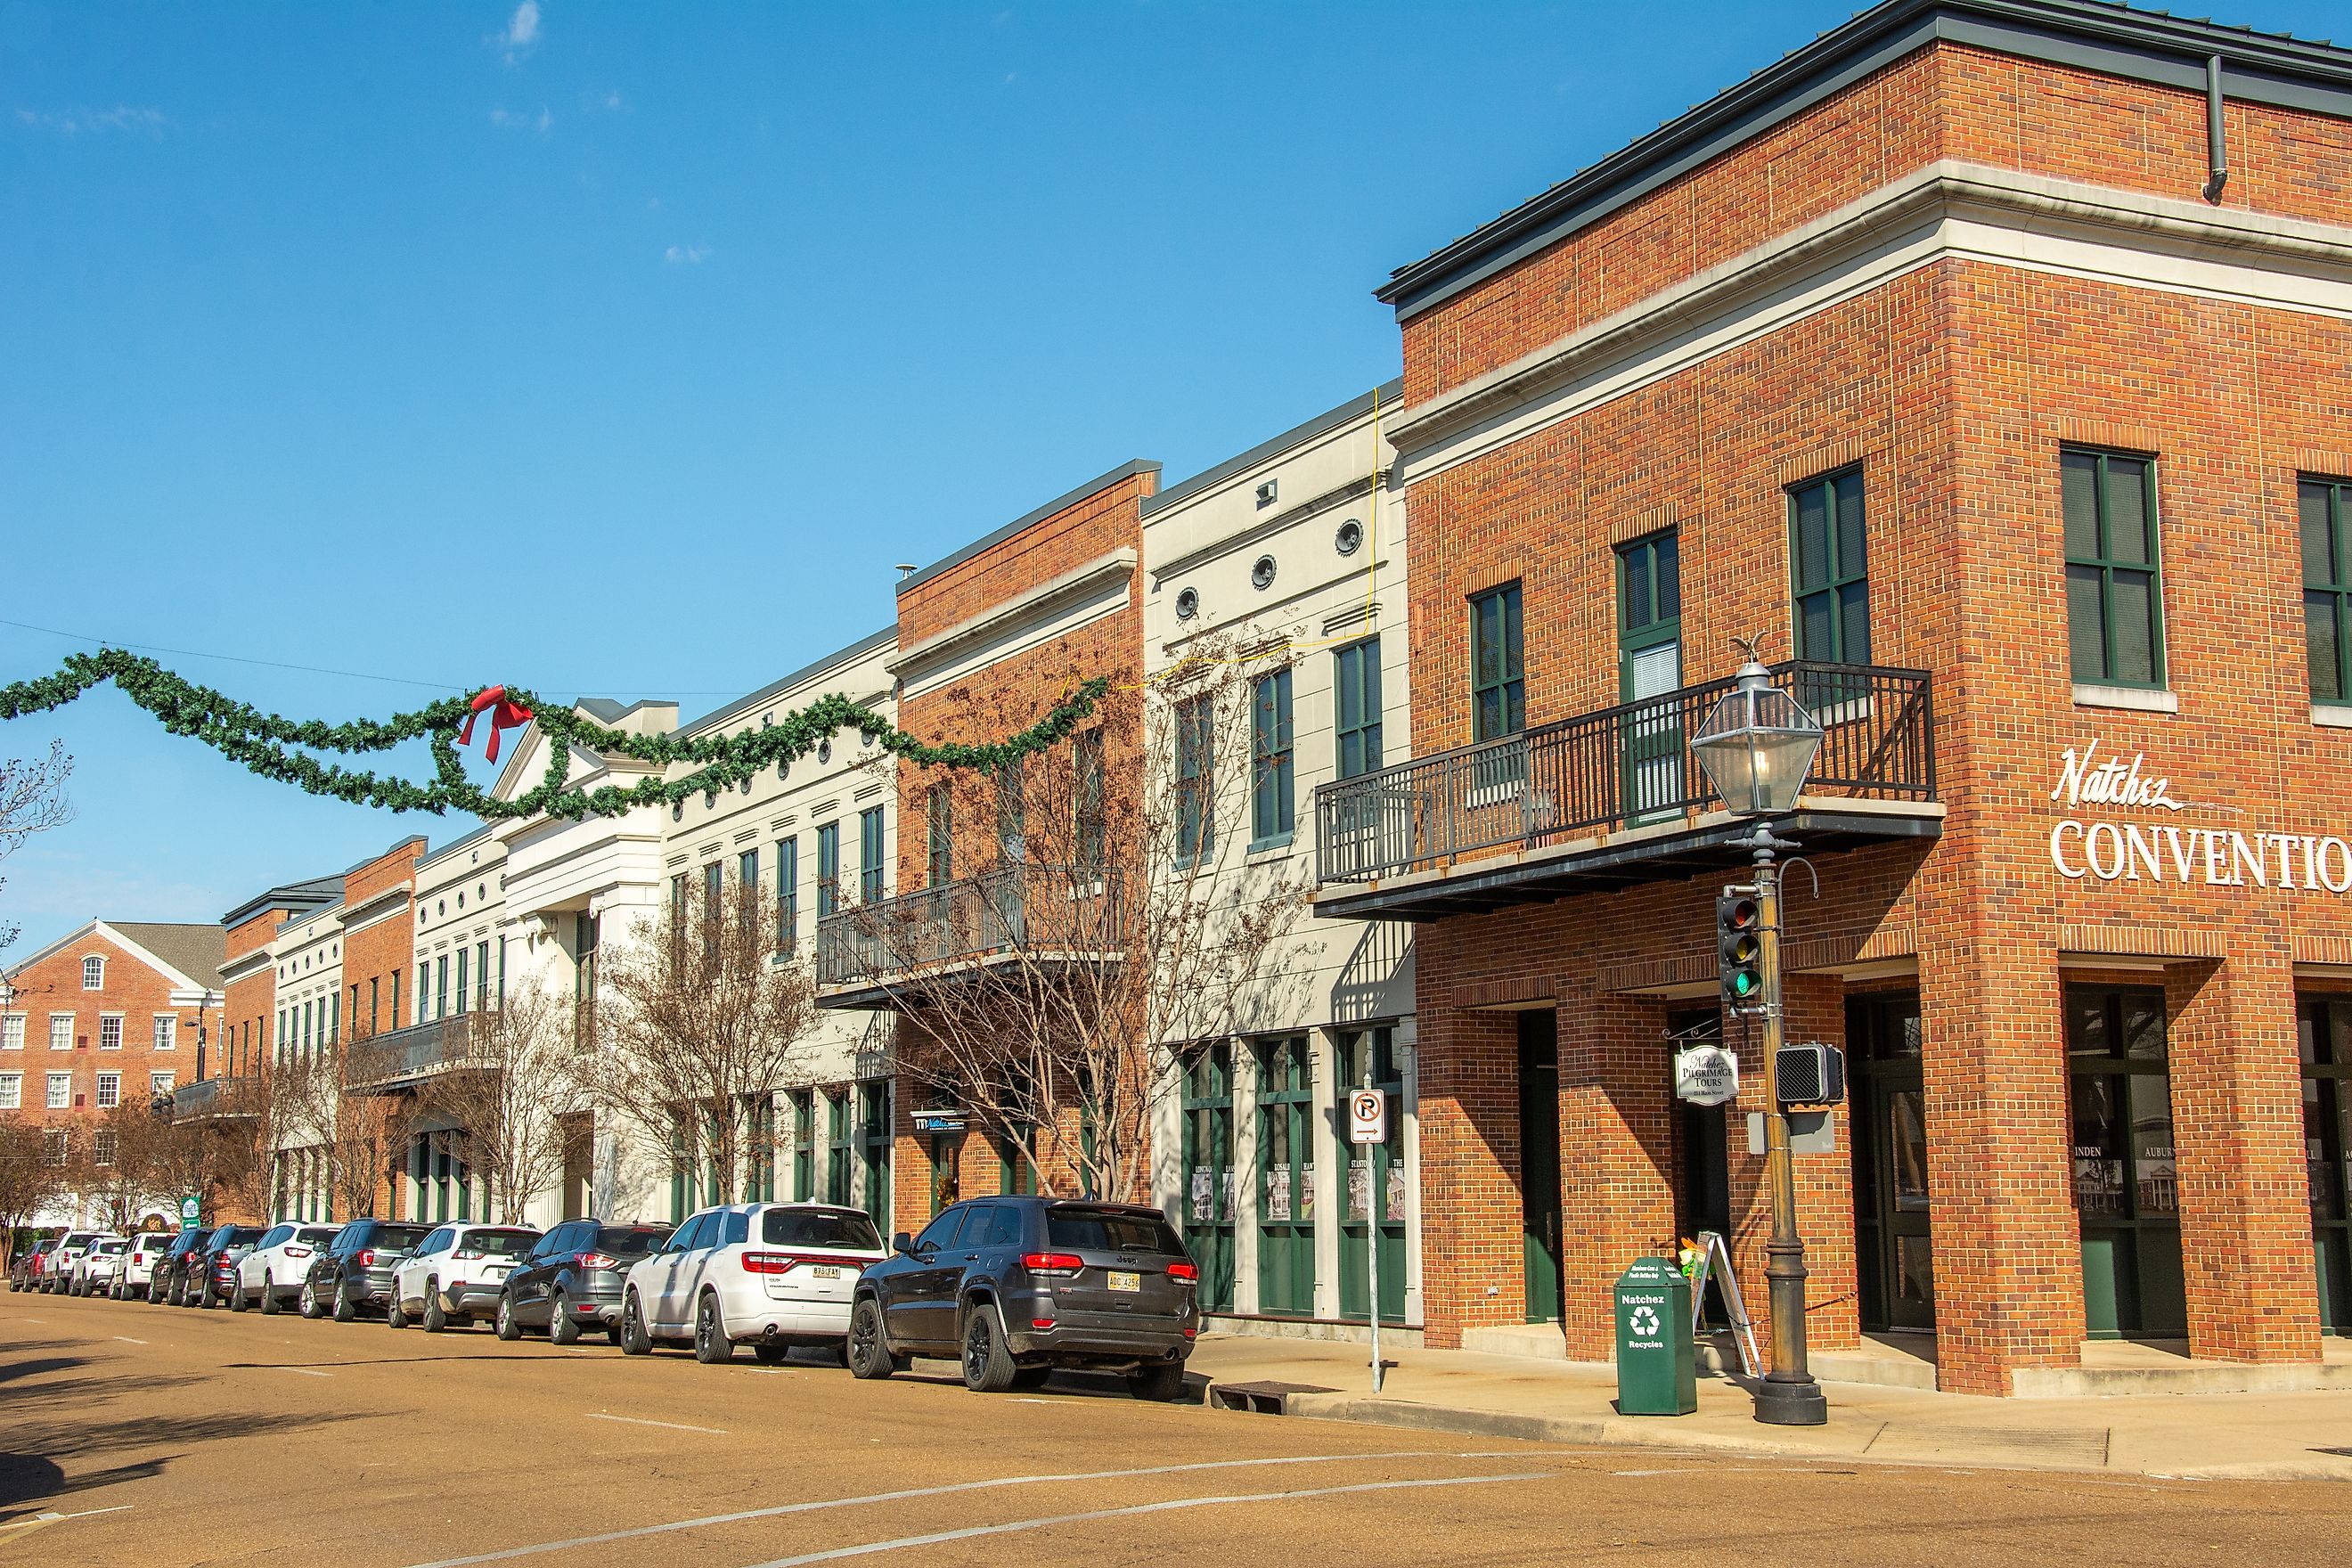 View of historic Natchez Main Street with Convention Center, 19th-century buildings, parked cars, and Christmas decorations in Natchez, Mississippi, USA Editorial credit: Nina Alizada / Shutterstock.com